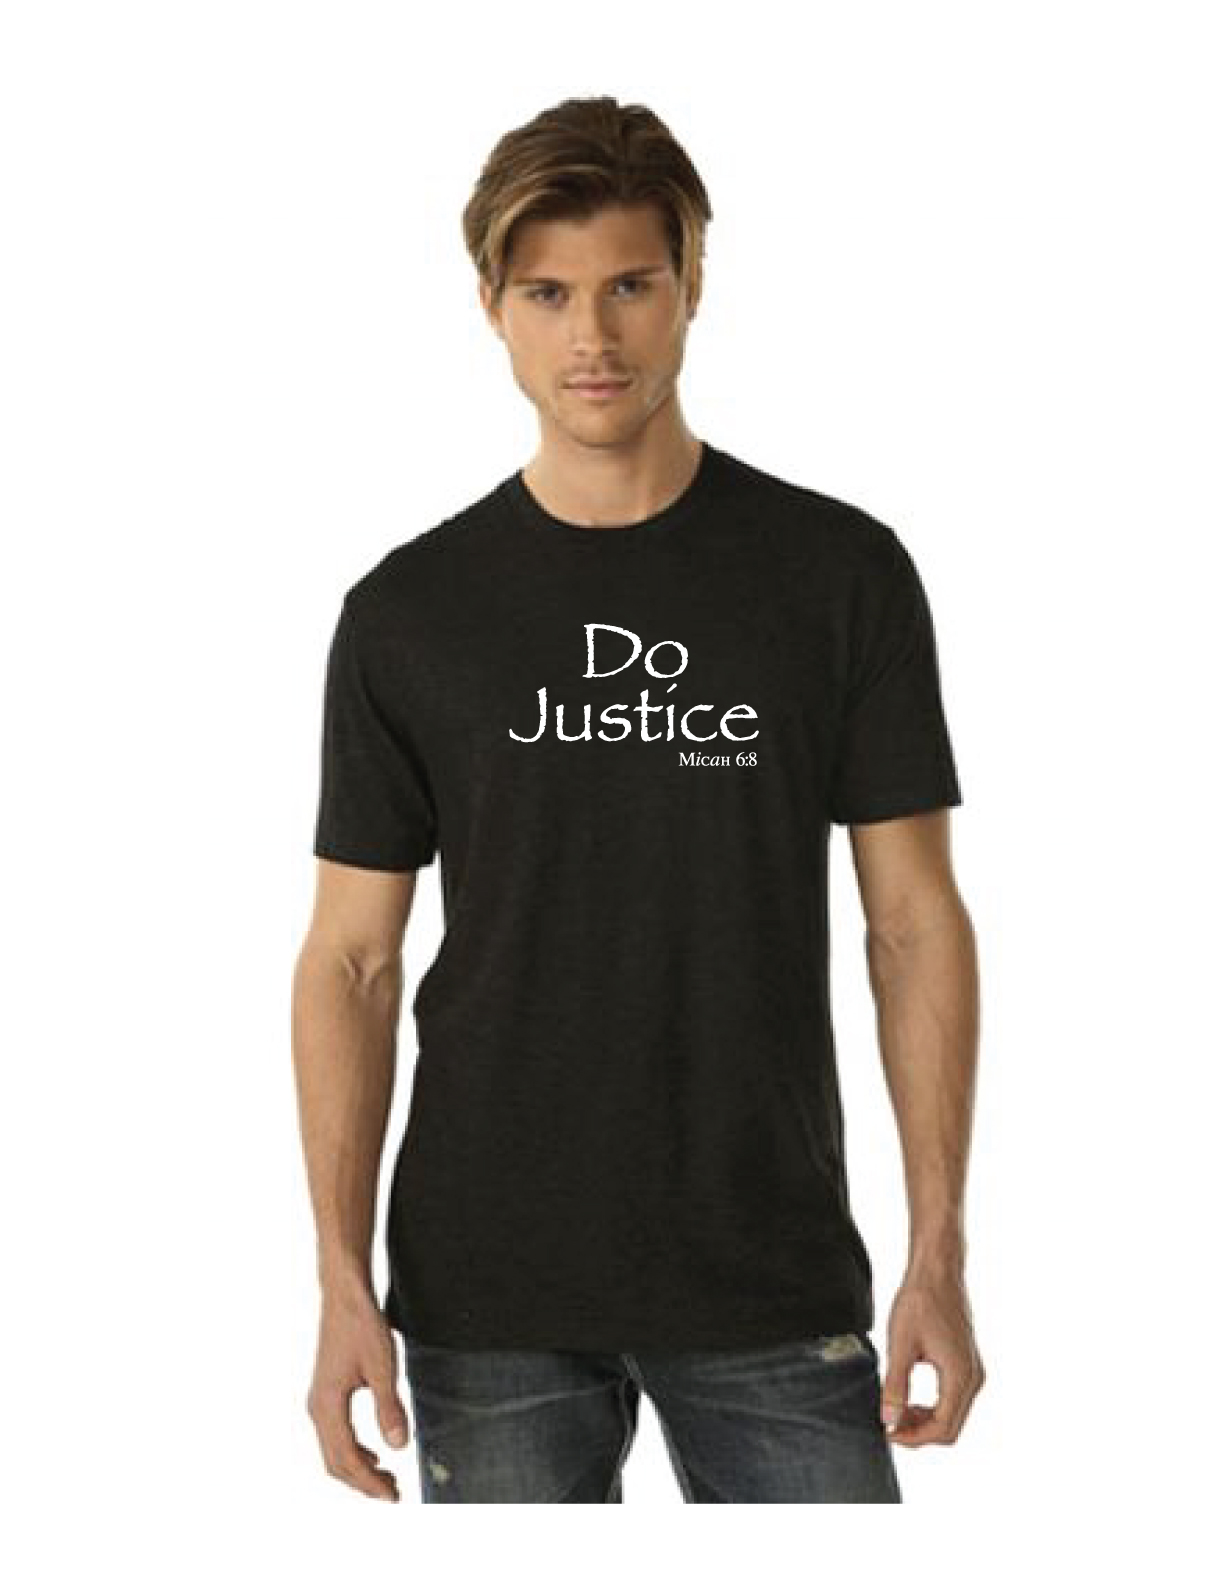 The Road Less Travelled: Introducing Do Justice T- Shirts and a ...